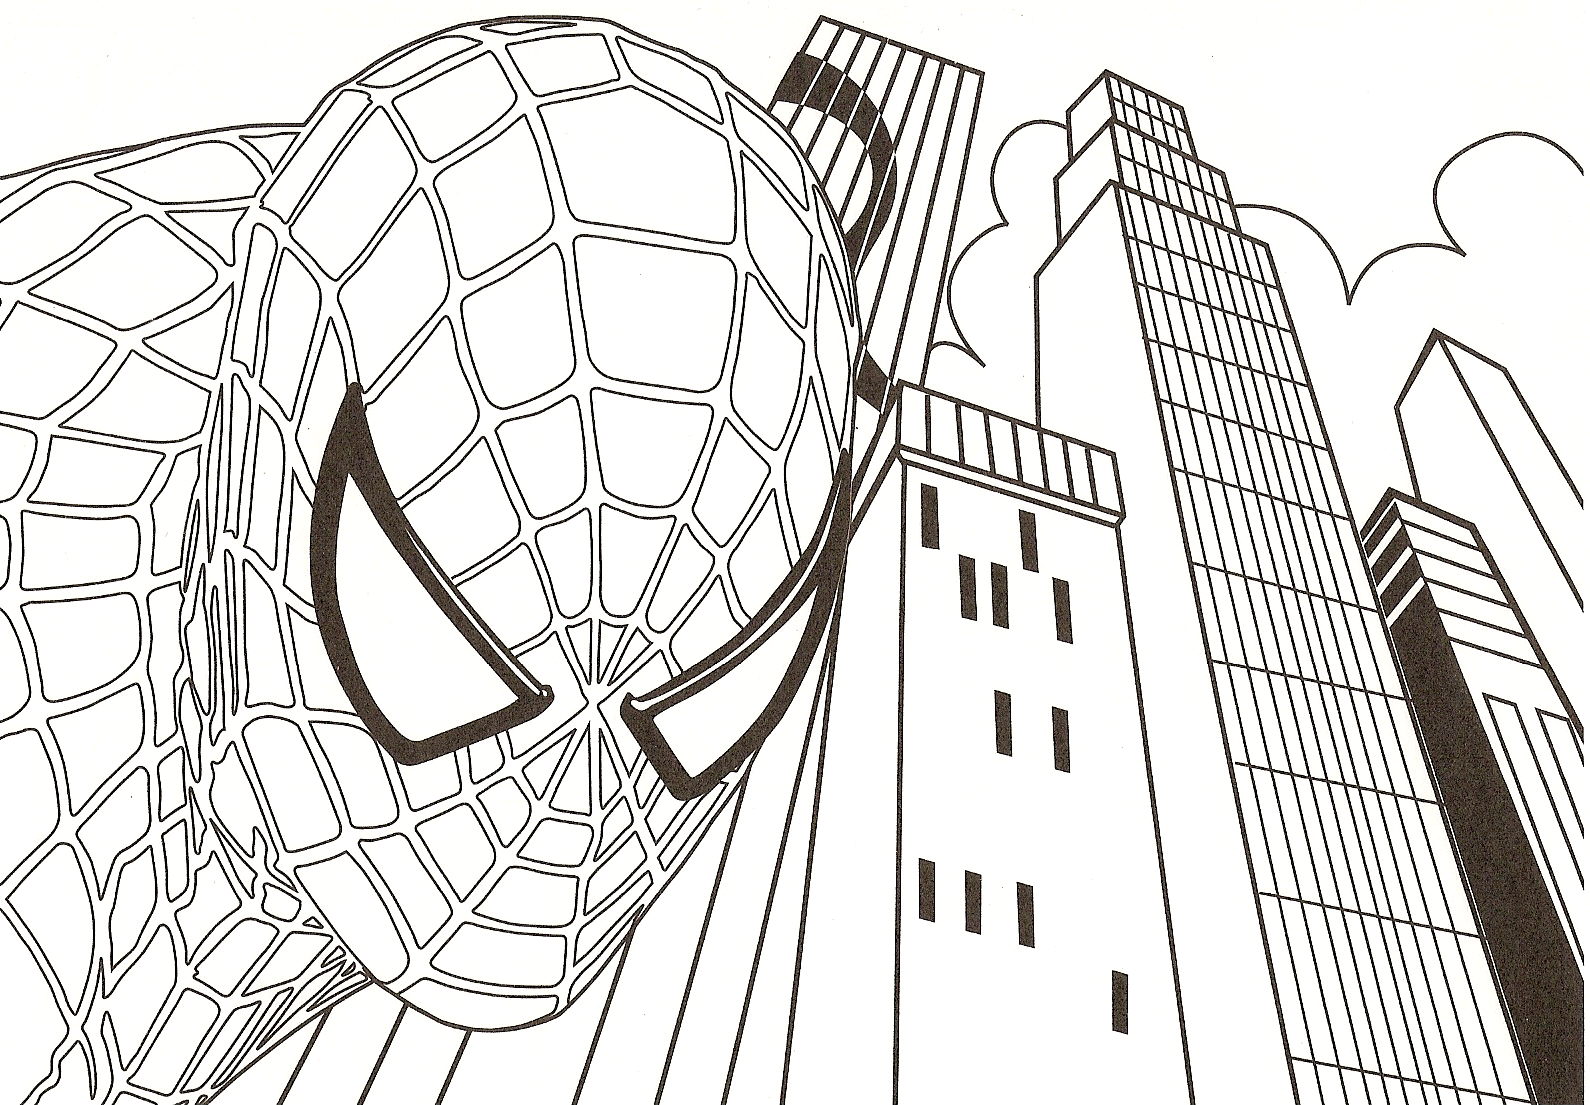 Spider-Man - Free printable Coloring pages for kids - Page 2